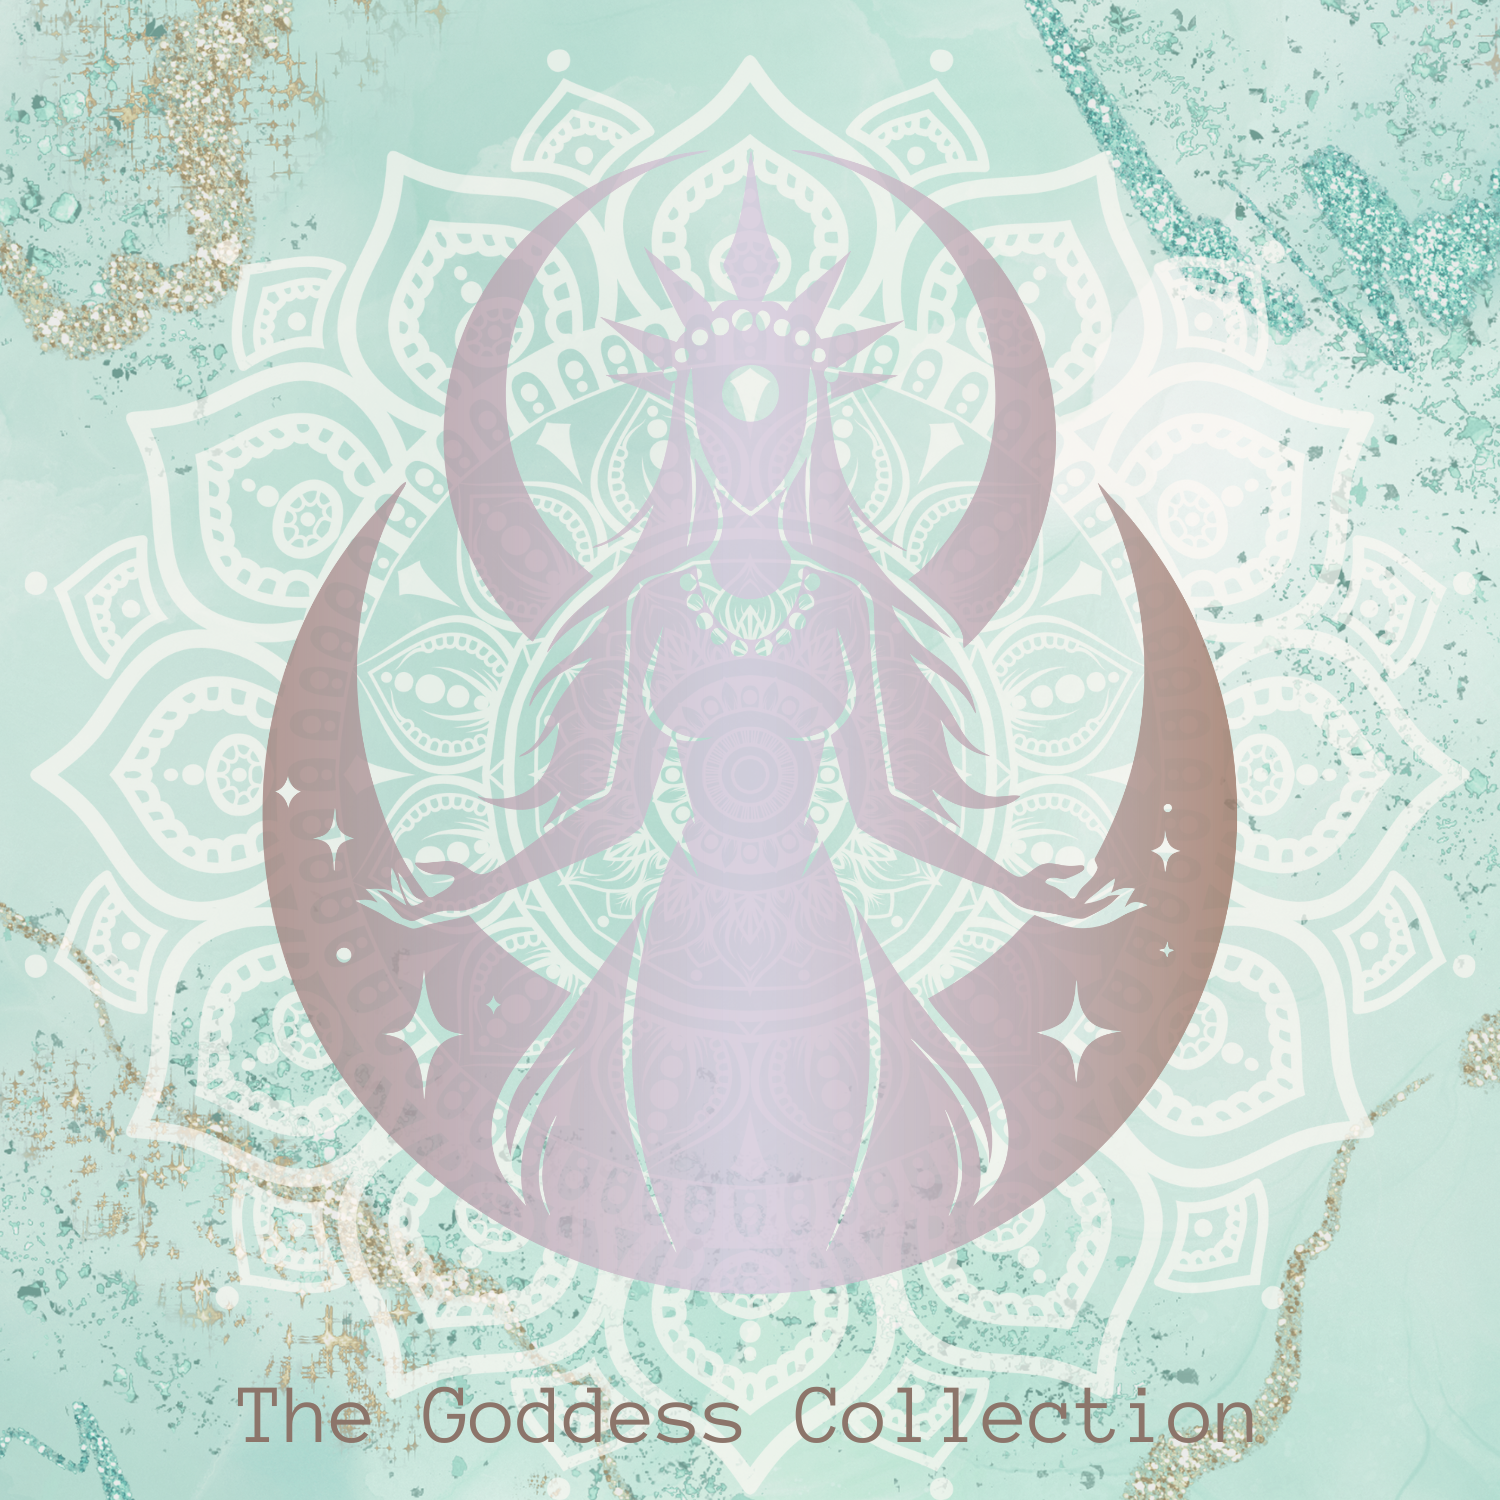 The Goddess Collection